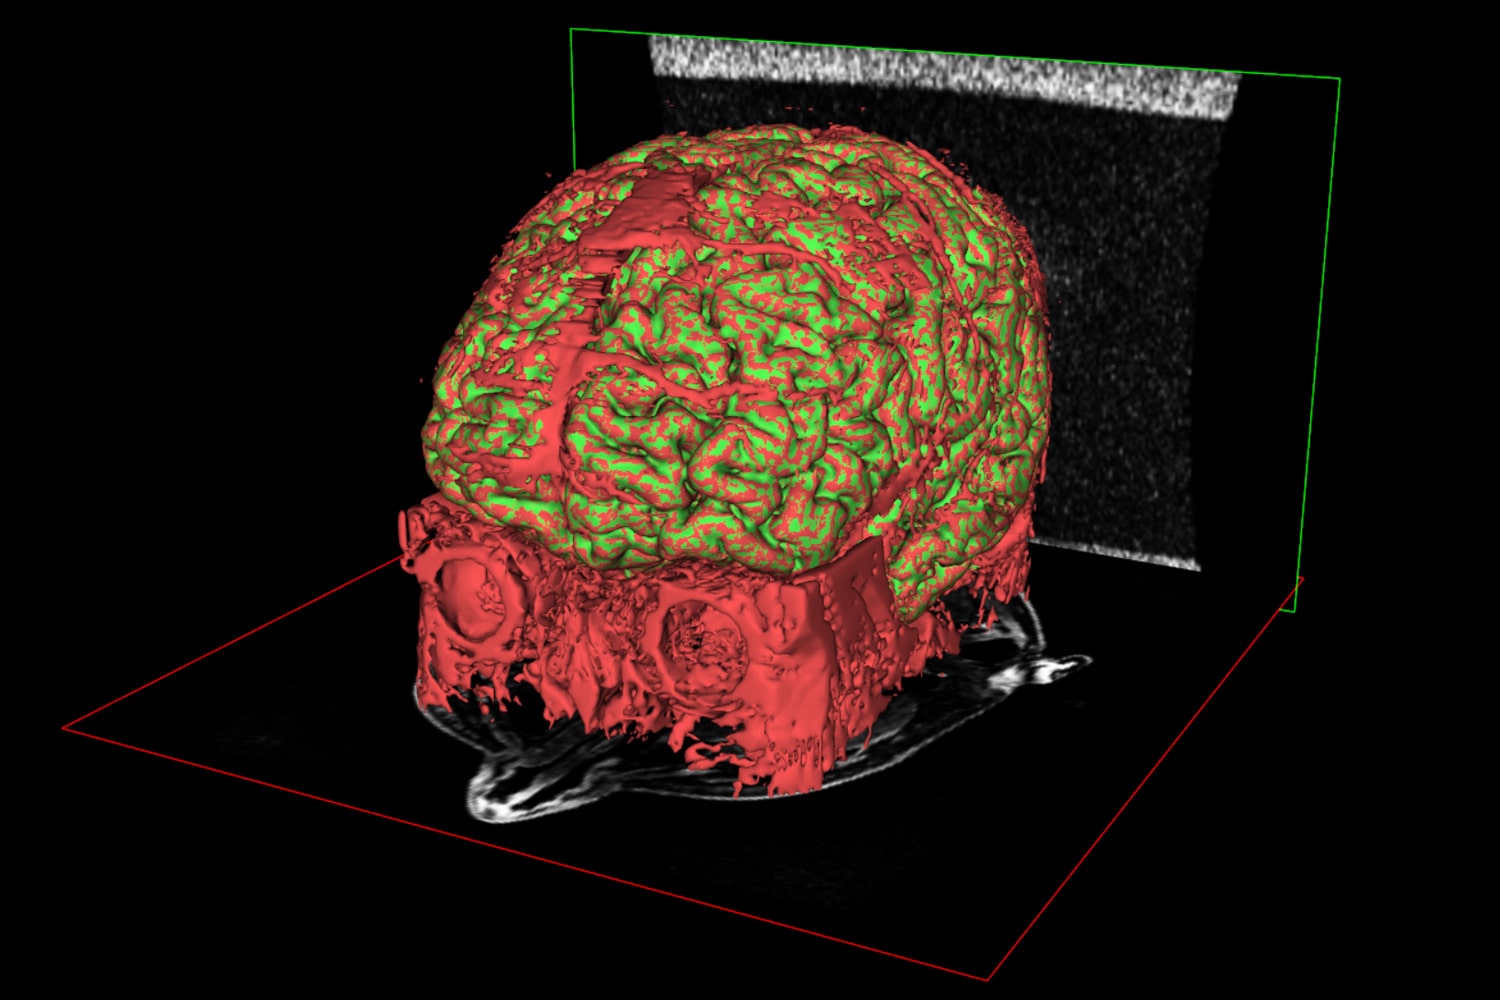 Blood vessels clinging to the surface are highlighted in red, overlaid onto the final model in green.